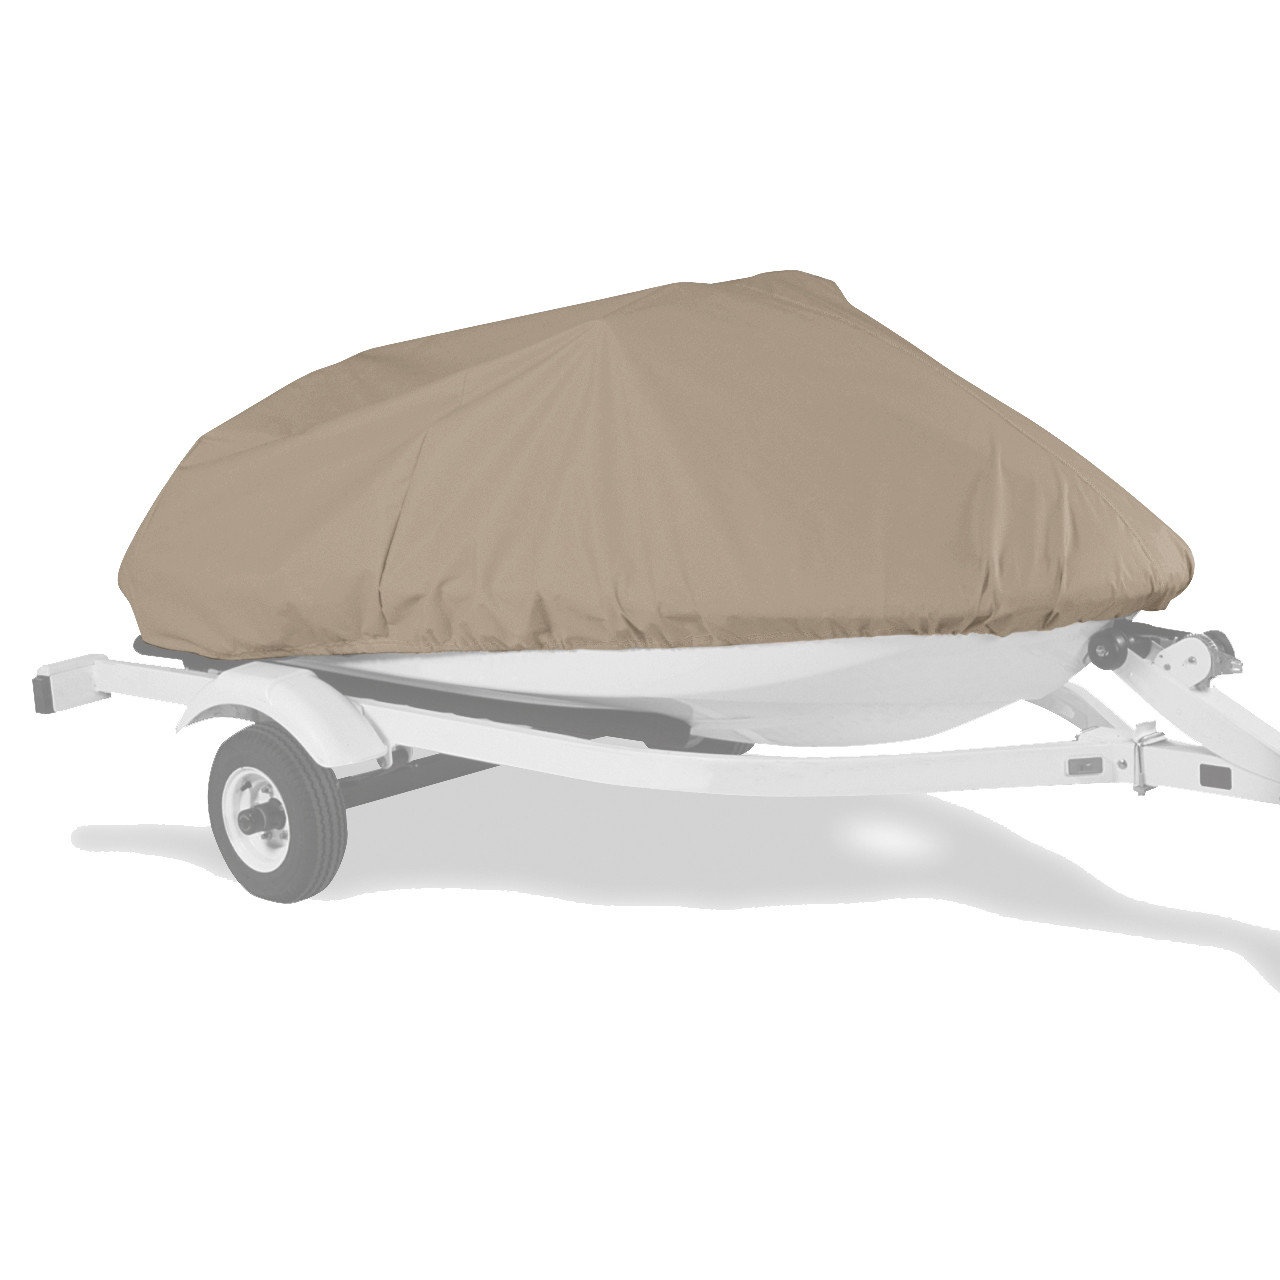 Personal Water Craft Boat Cover 9' 8